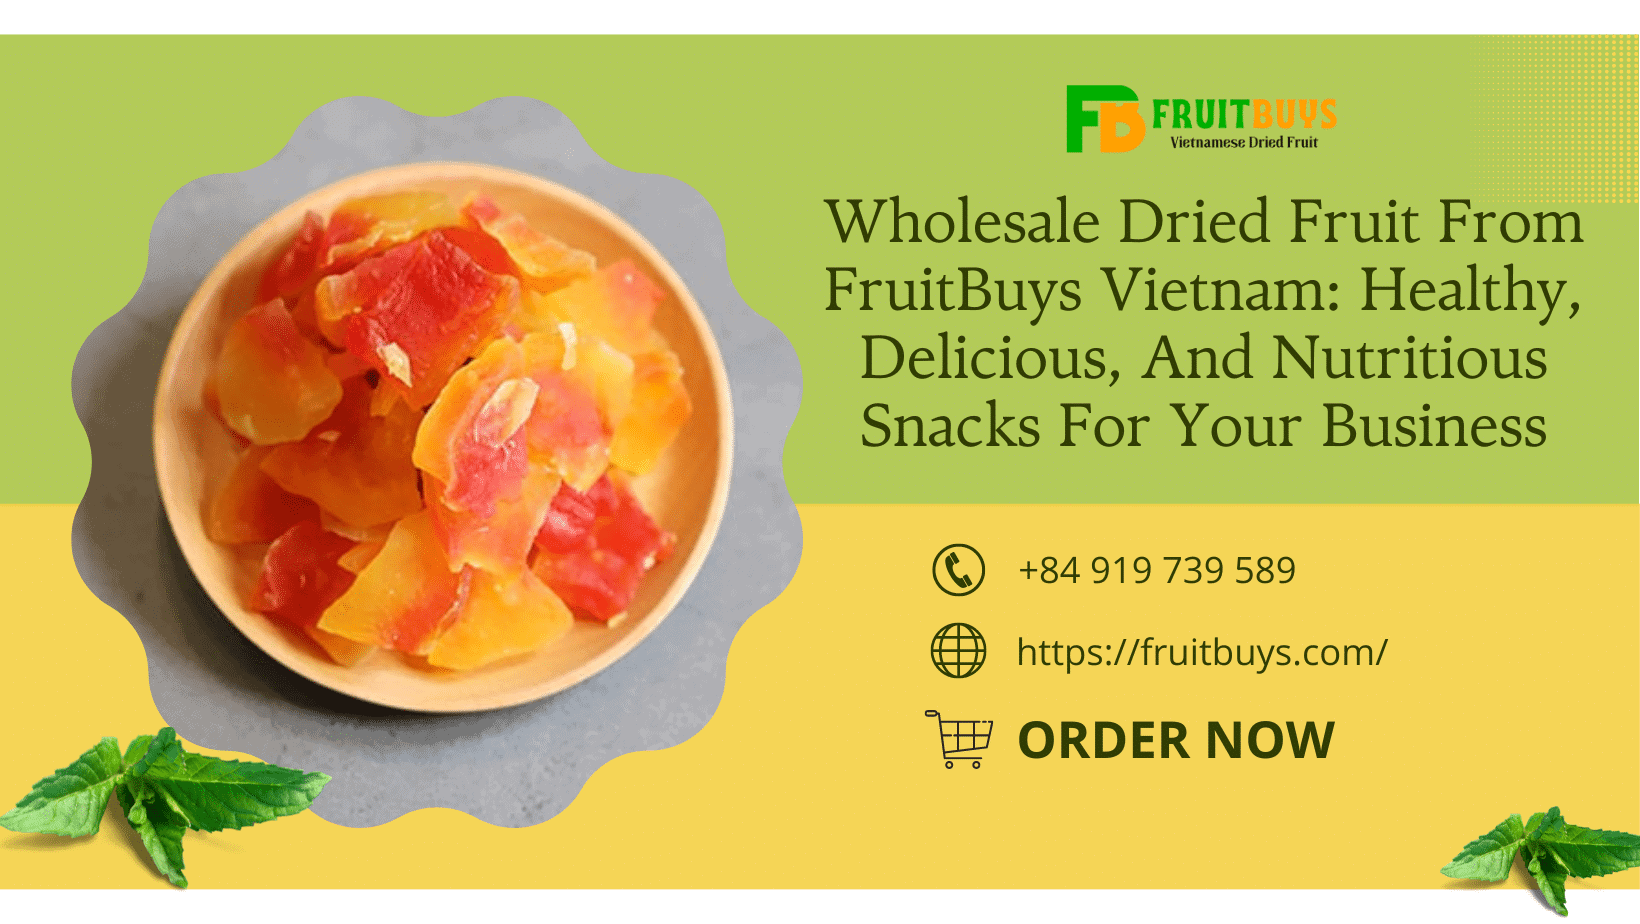 FruitBuys Vietnam  Wholesale Dried Fruit From FruitBuys Vietnam_ Healthy, Delicious, And Nutritious Snacks For Your Business